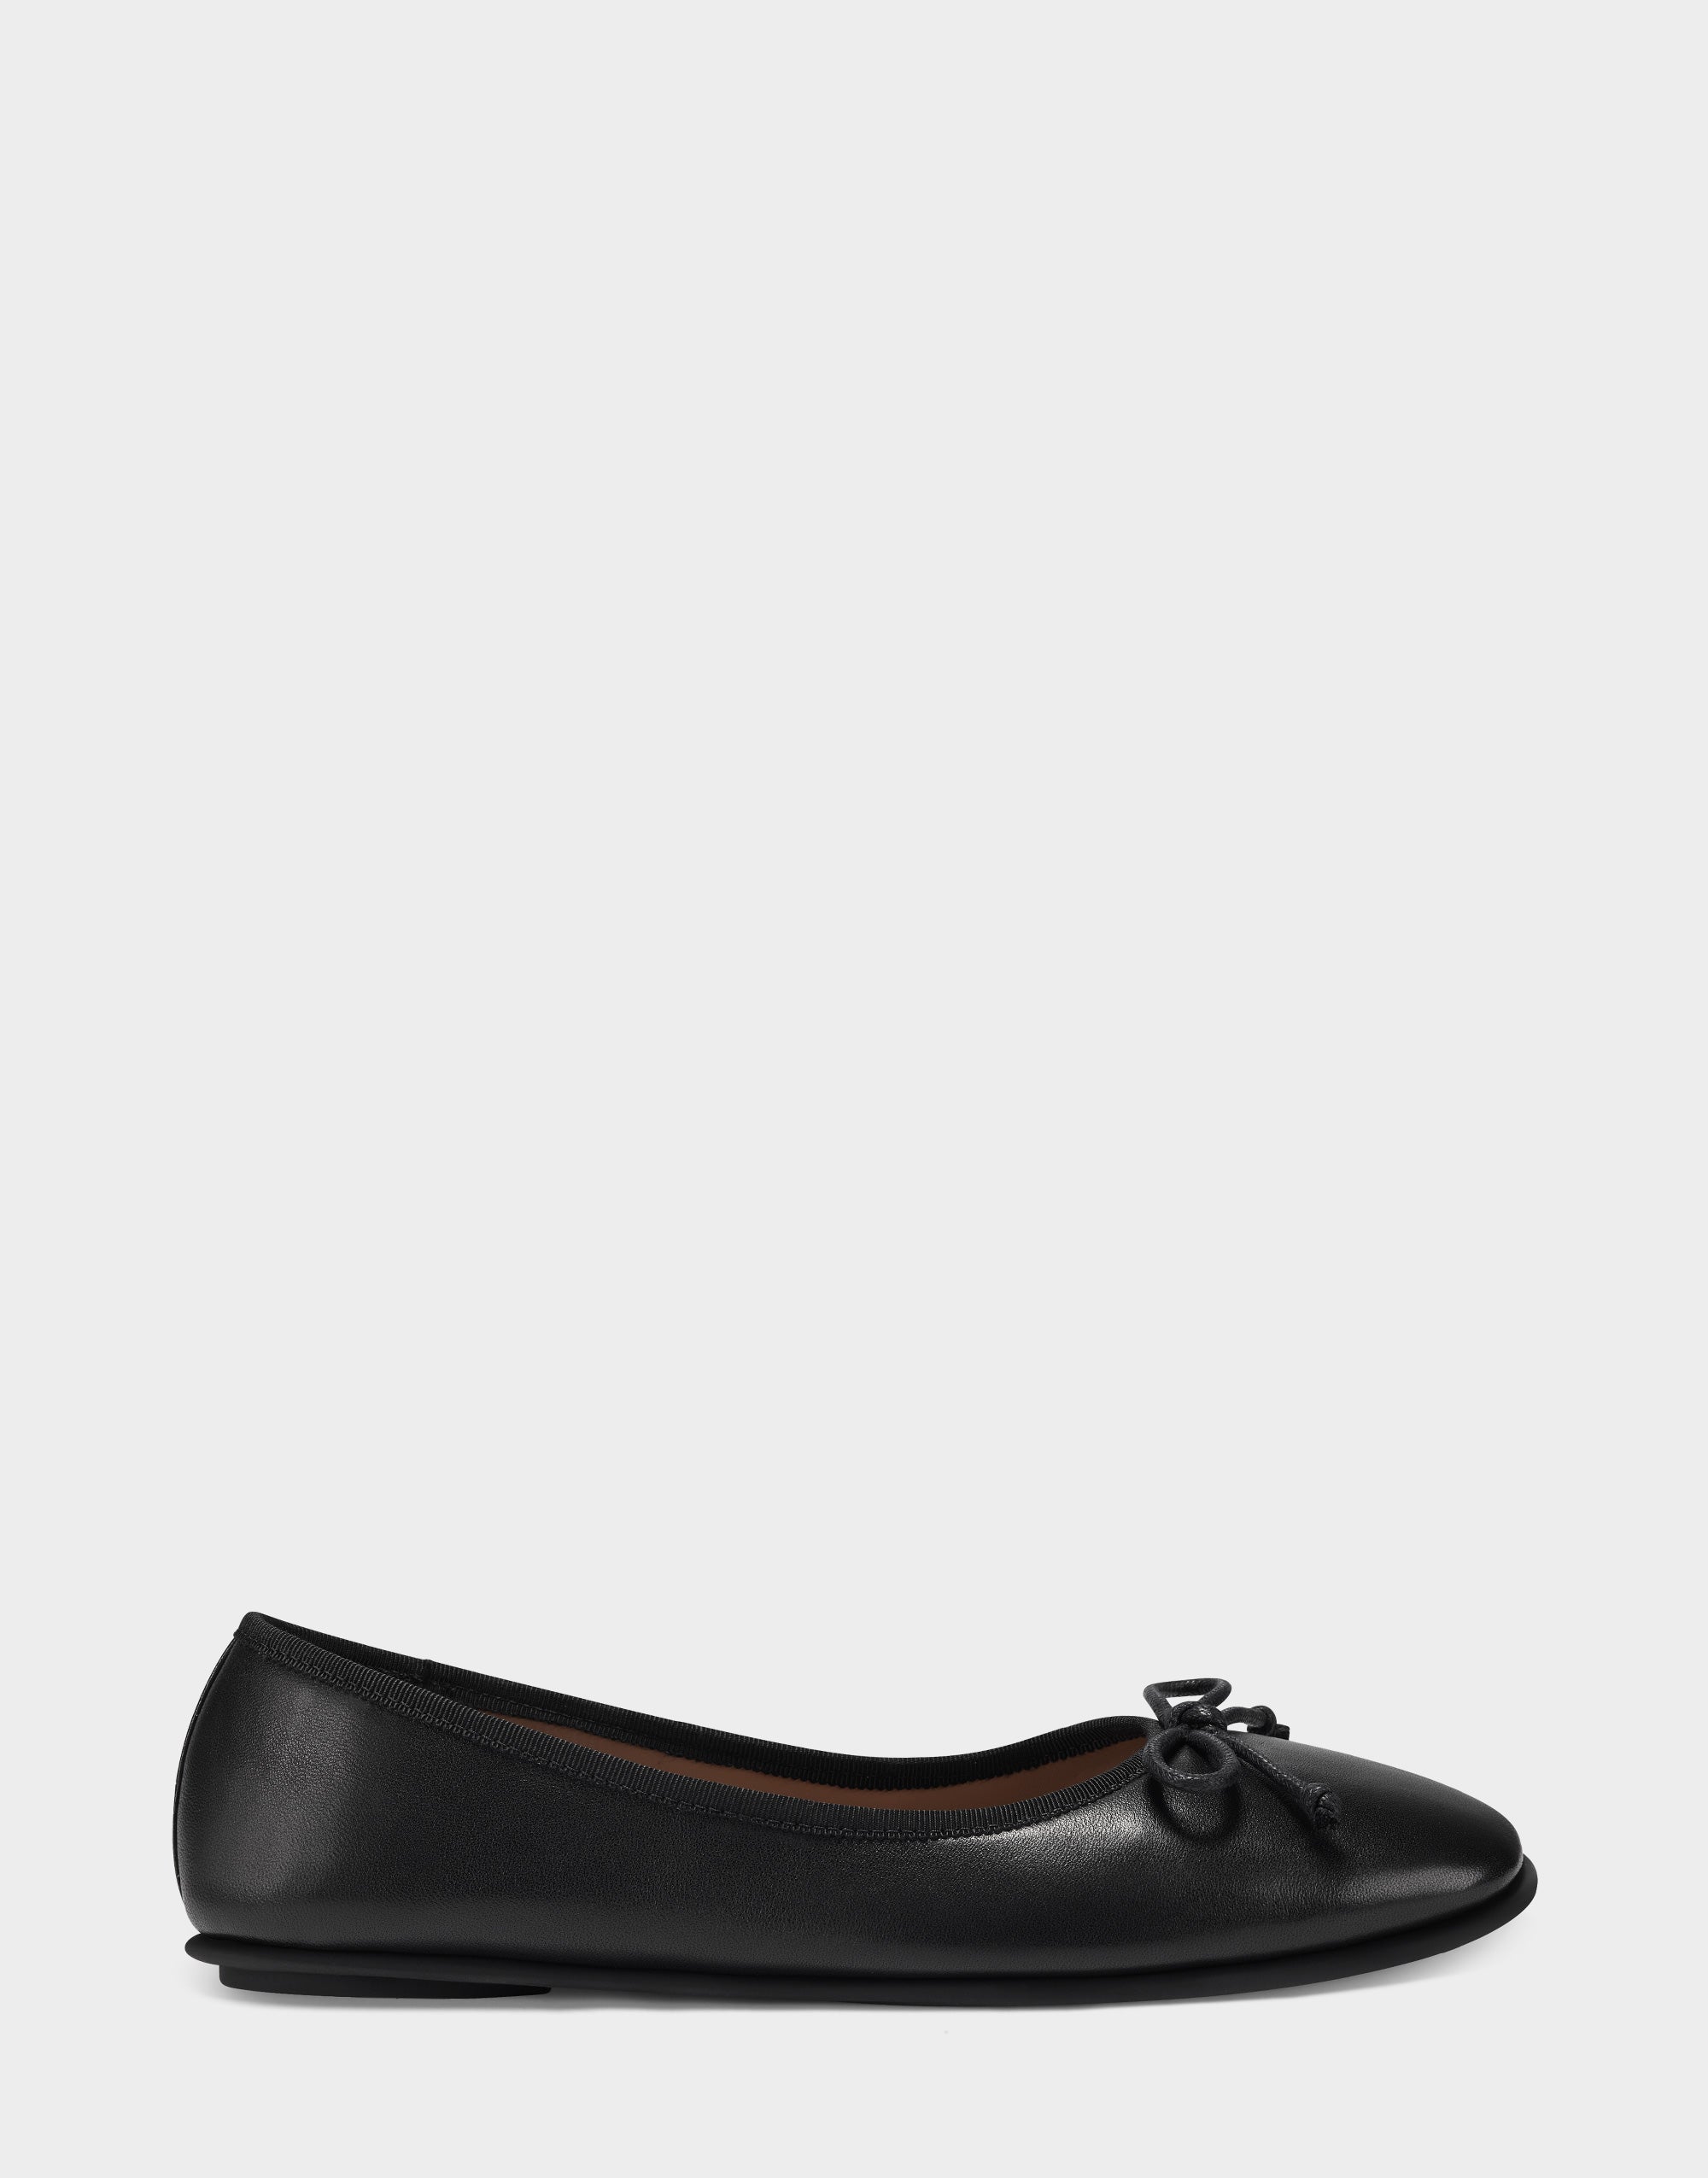 Black Leather Ballet Flat with Bow Catalina – Aerosoles